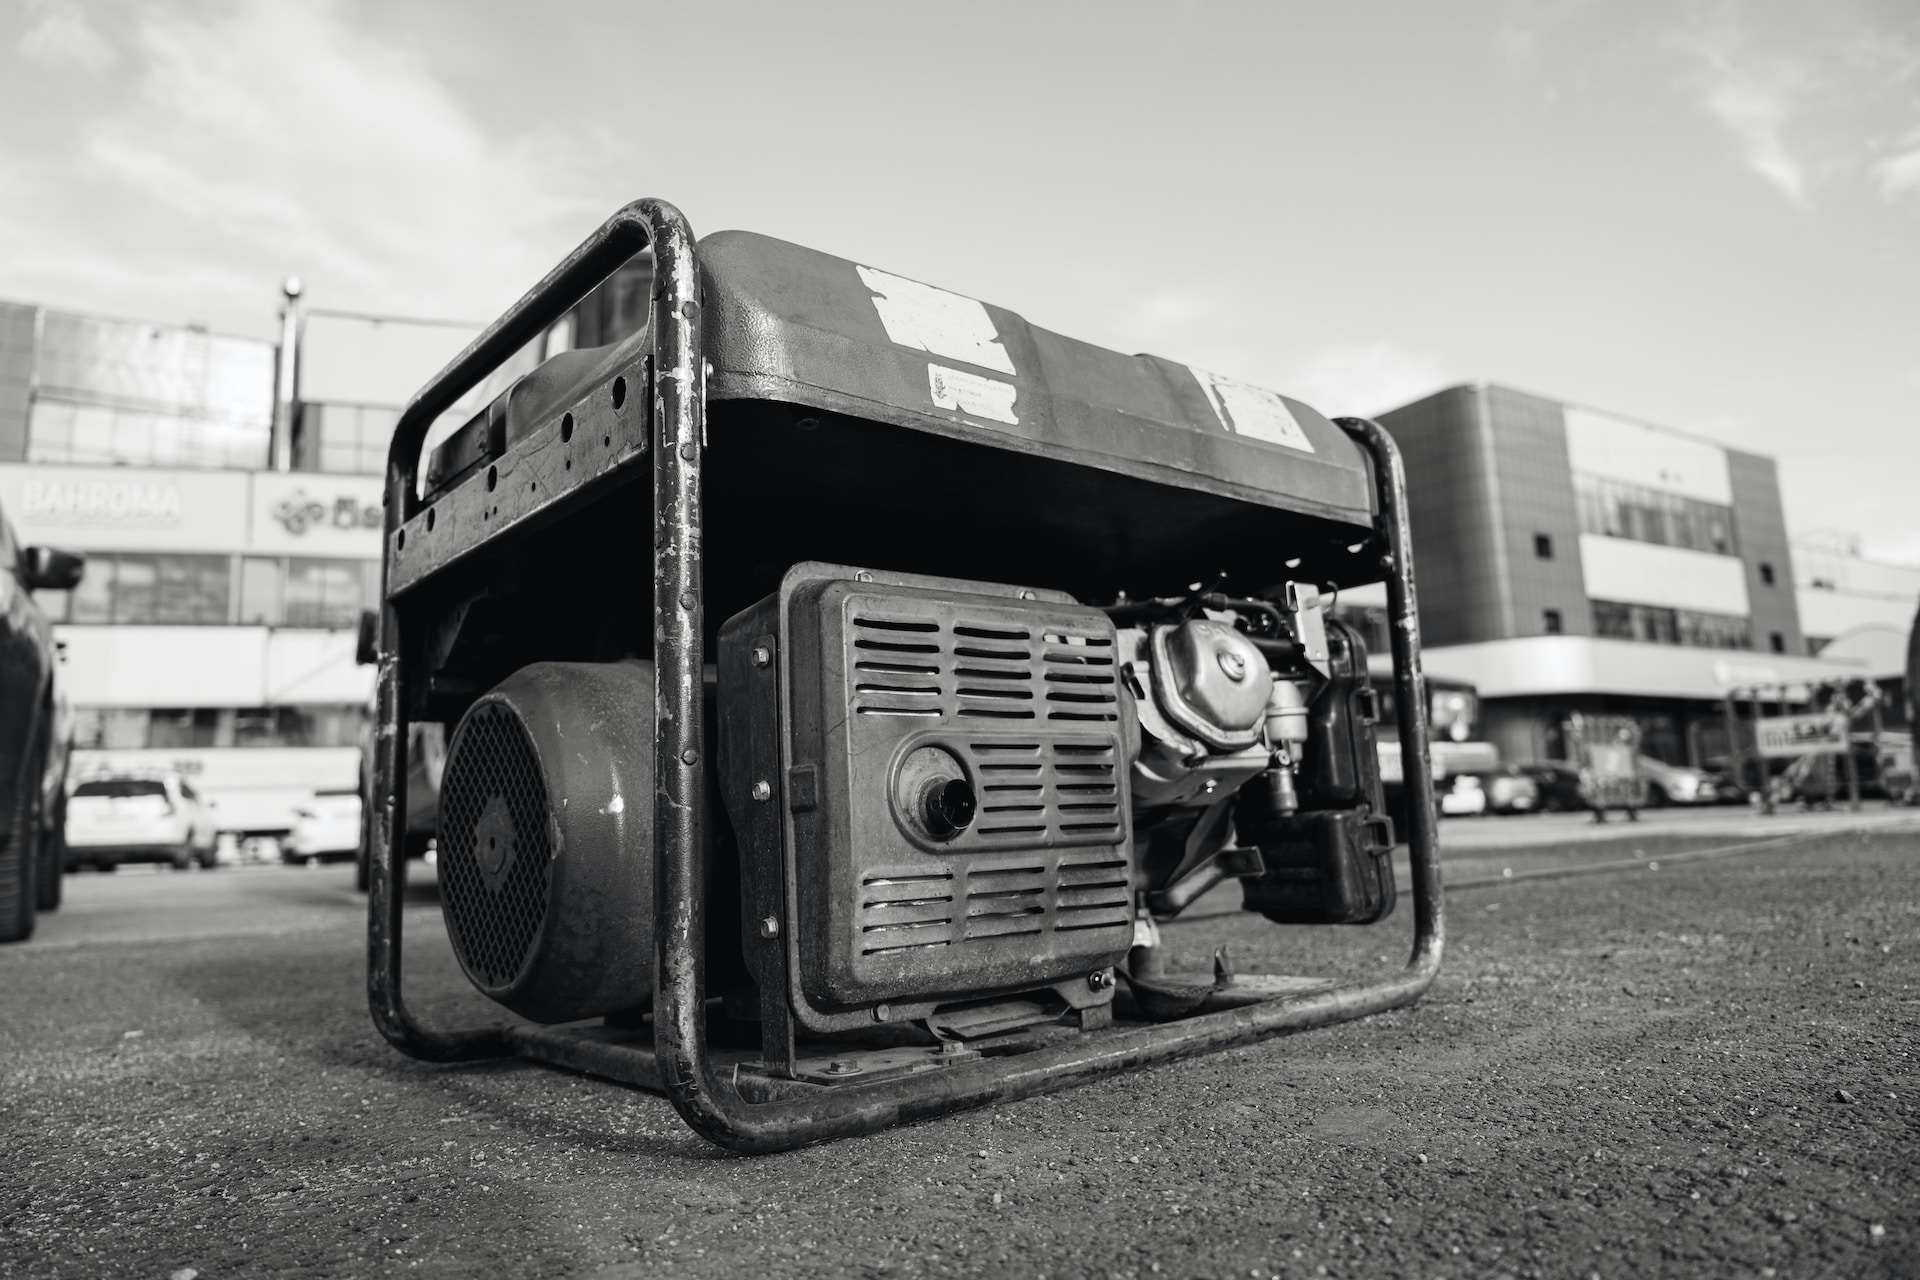 Regular Generator Or Inverter Generator: What’s The Difference?